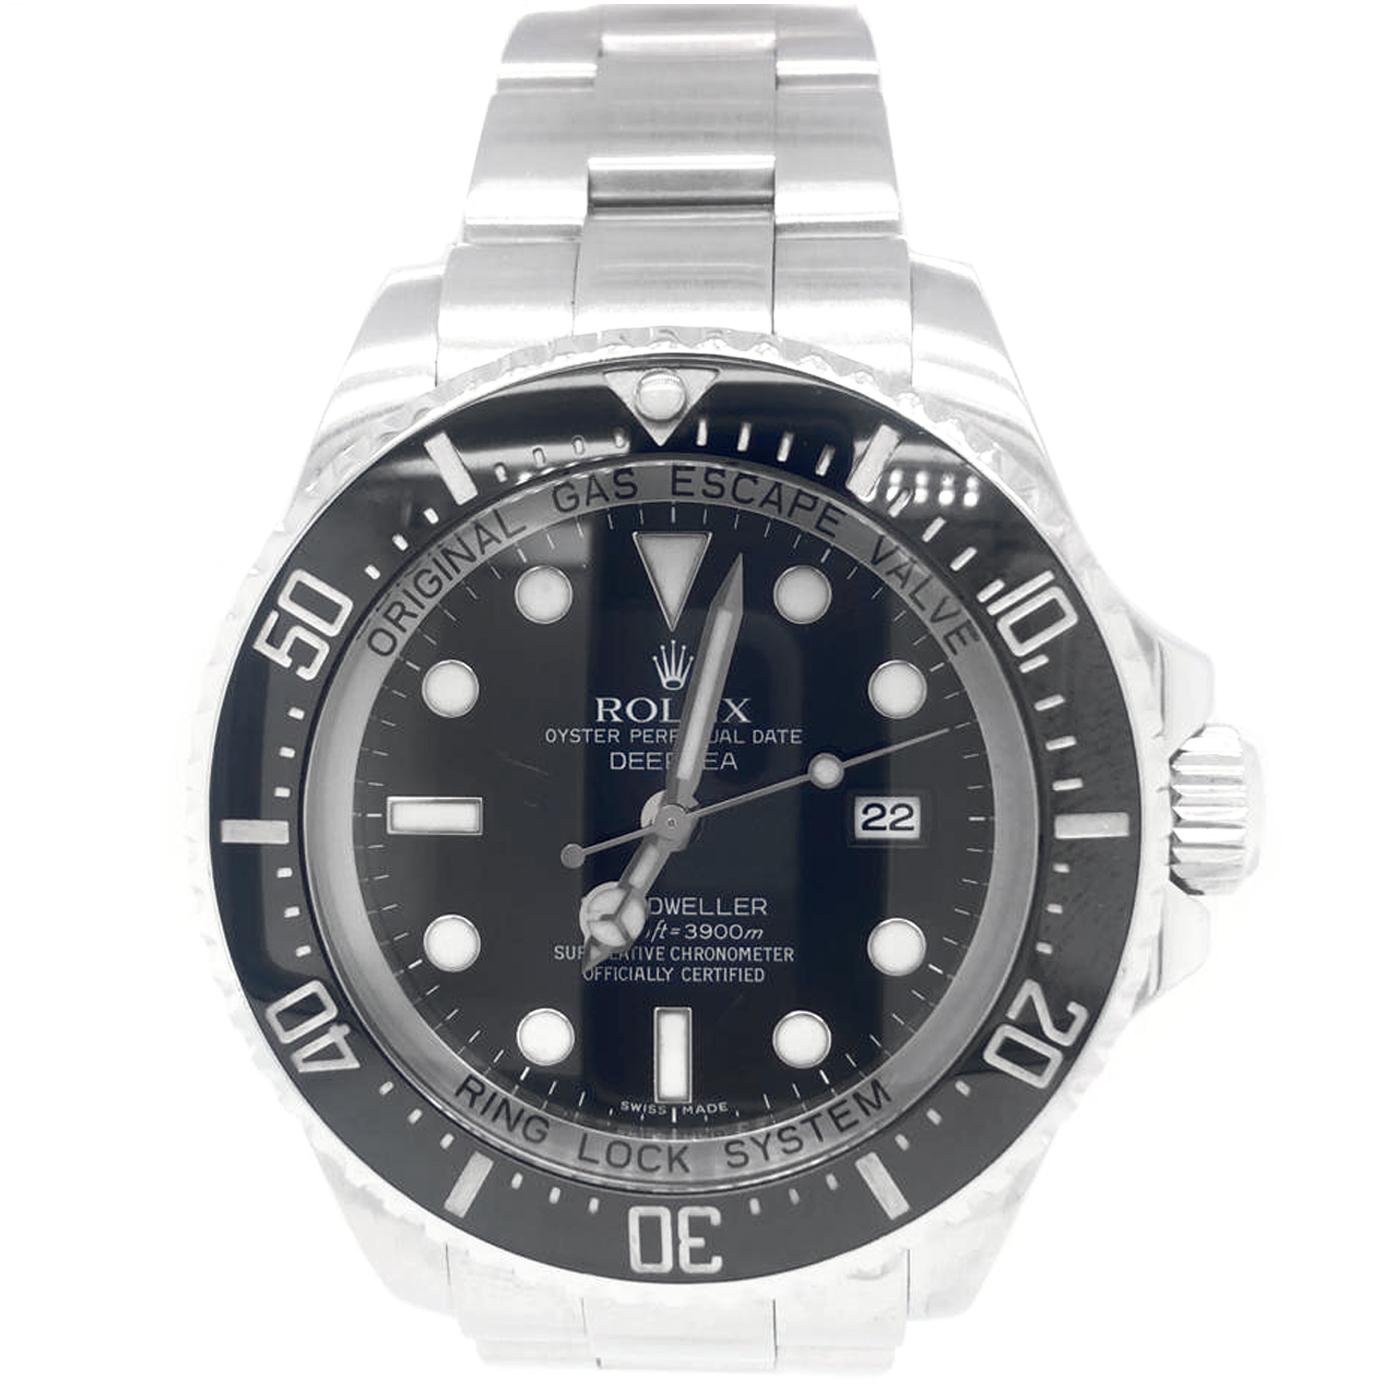  Rolex perfectly responded to in 2008 with the Rolex Sea-Dweller Deepsea 116660, which was designed as an update to the Sea-Dweller. When the watch was presented at Baselworld 2008, it quickly became the star of the show and polarized the fan